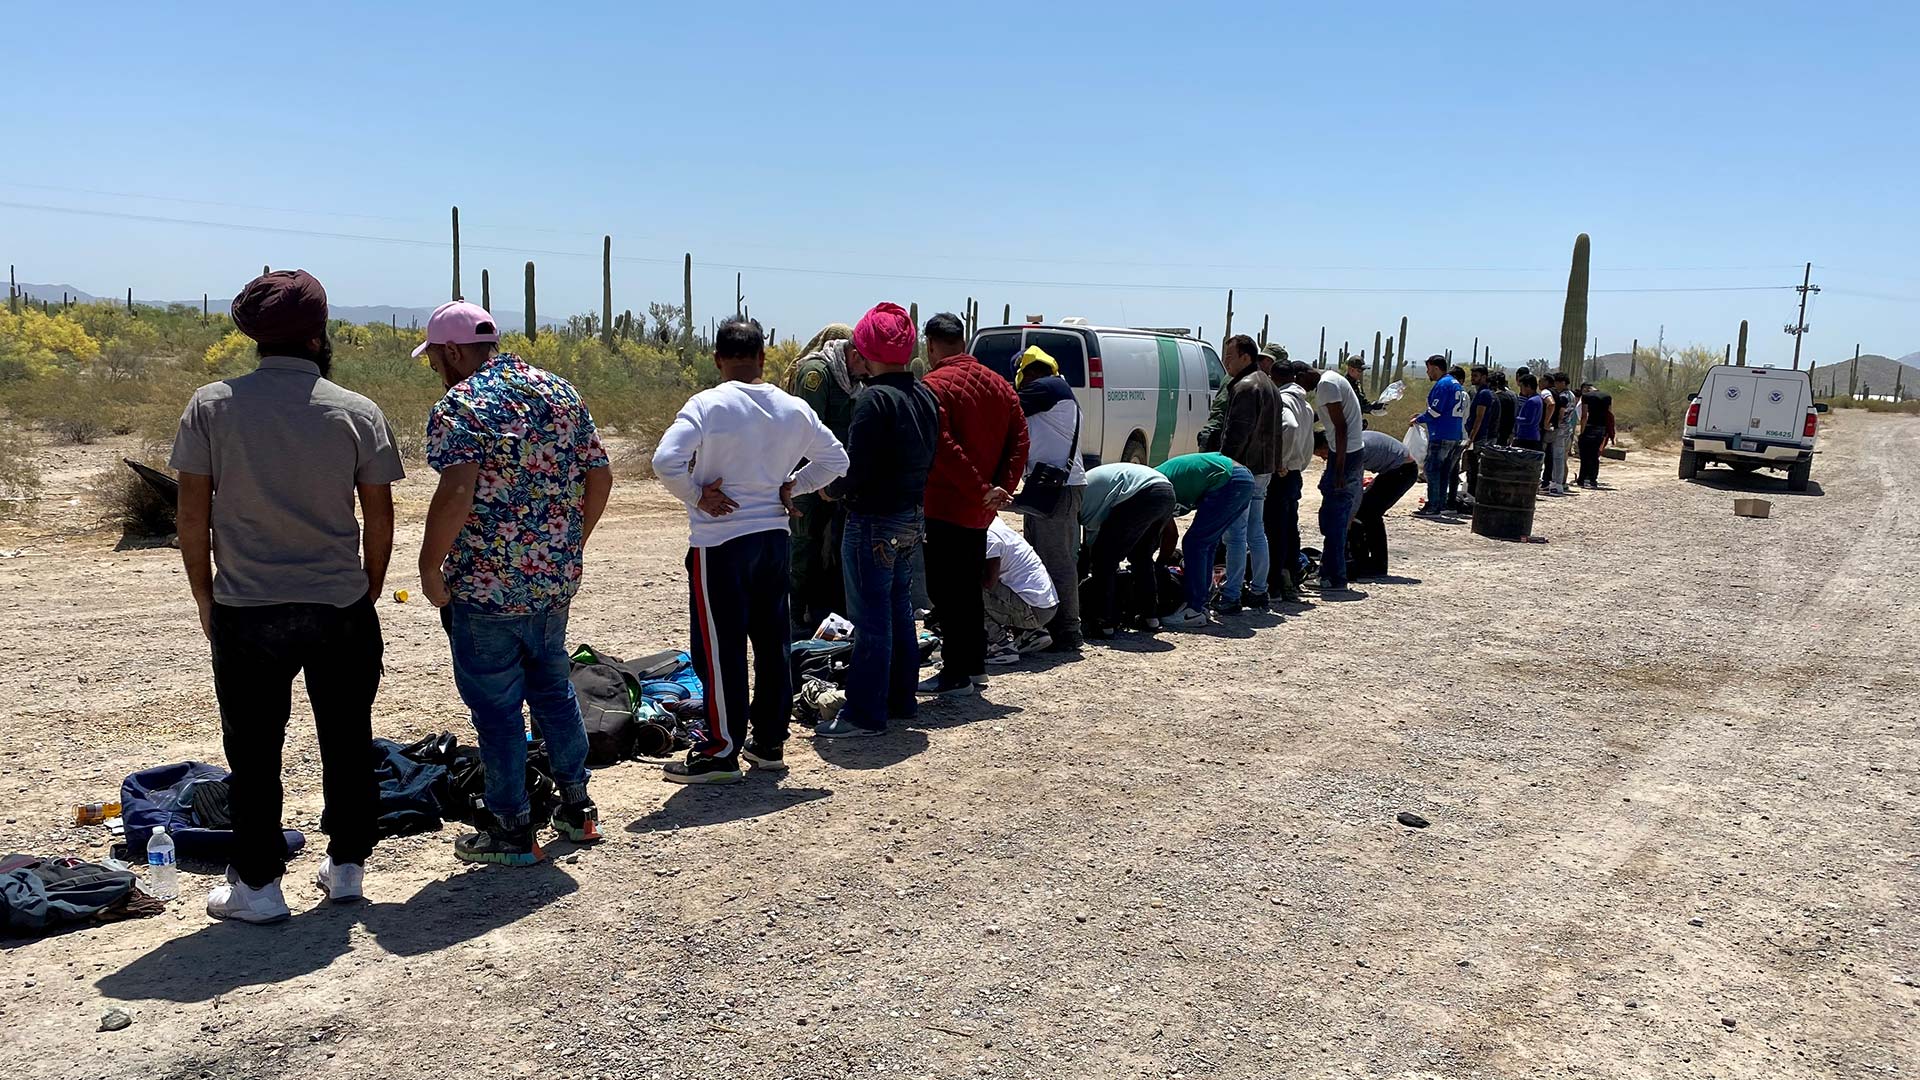 Lukeville port's temporary closure due to a migrant surge raises travel and economic concerns in Arizona, prompting officials to urge swift federal action.